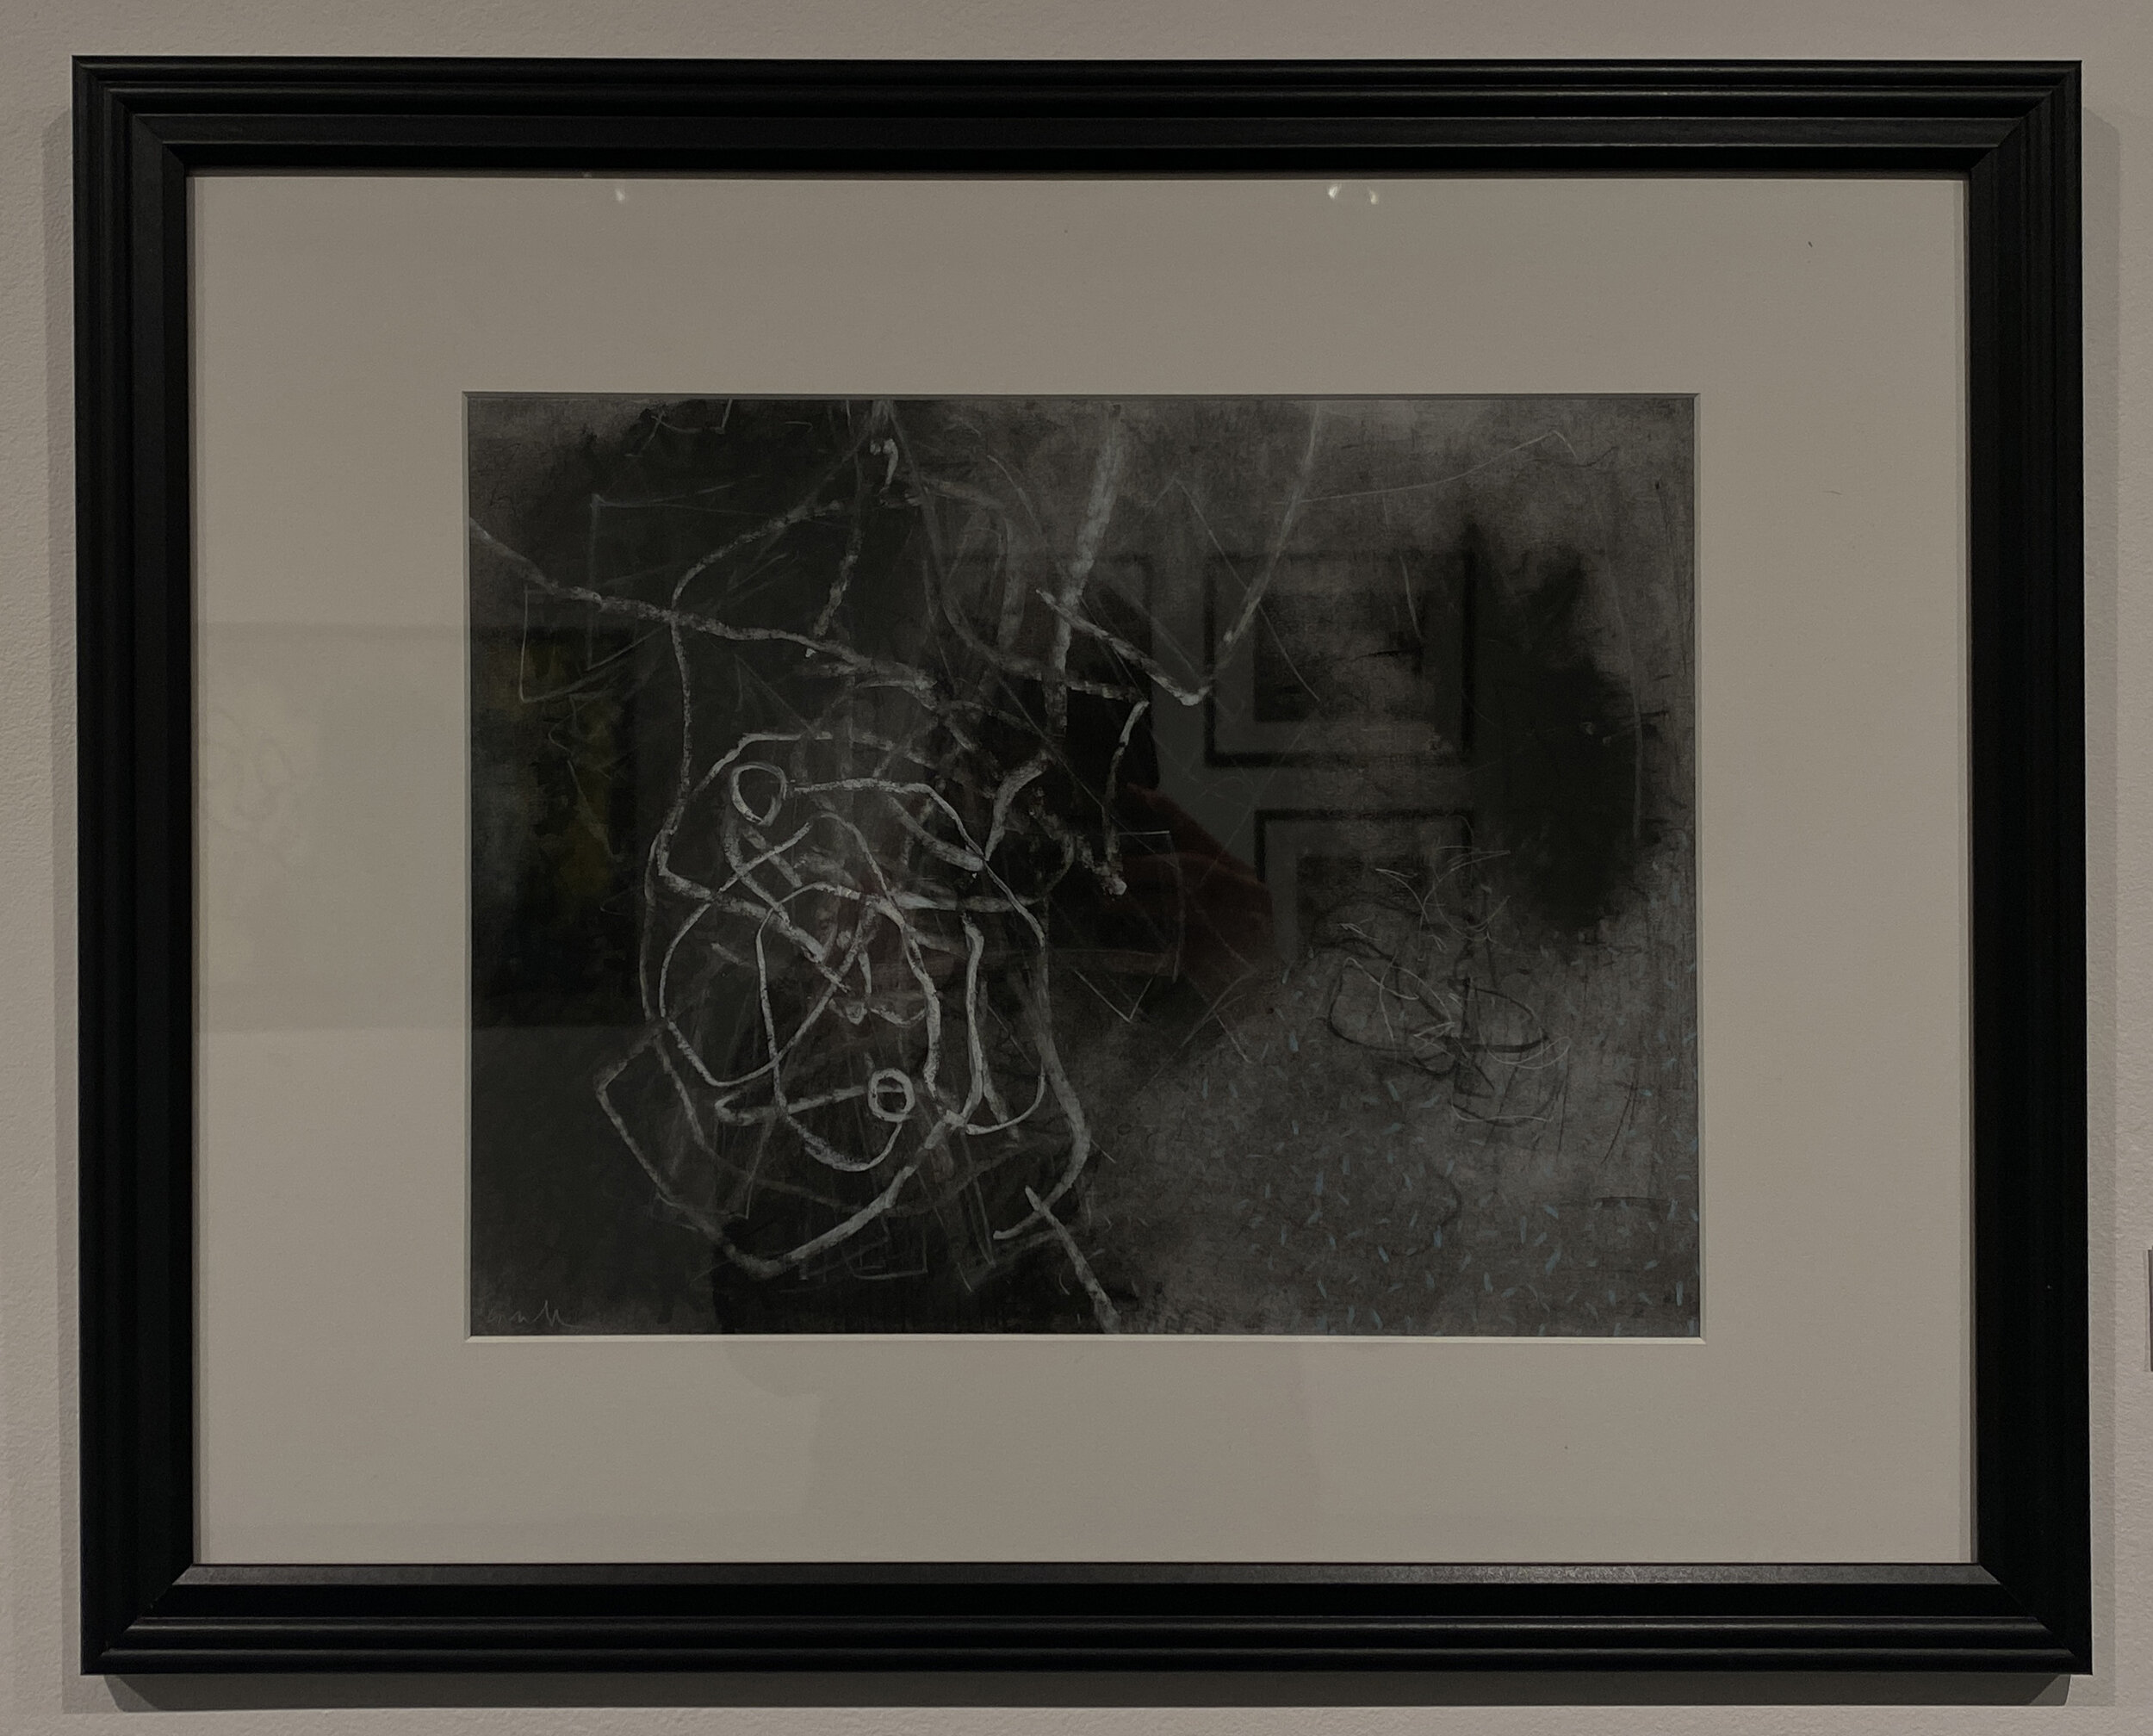  Pandemic drawing #49 (2020)  charcoal, compressed charcoal and mixed media on paper  10½ x 13½ inches 